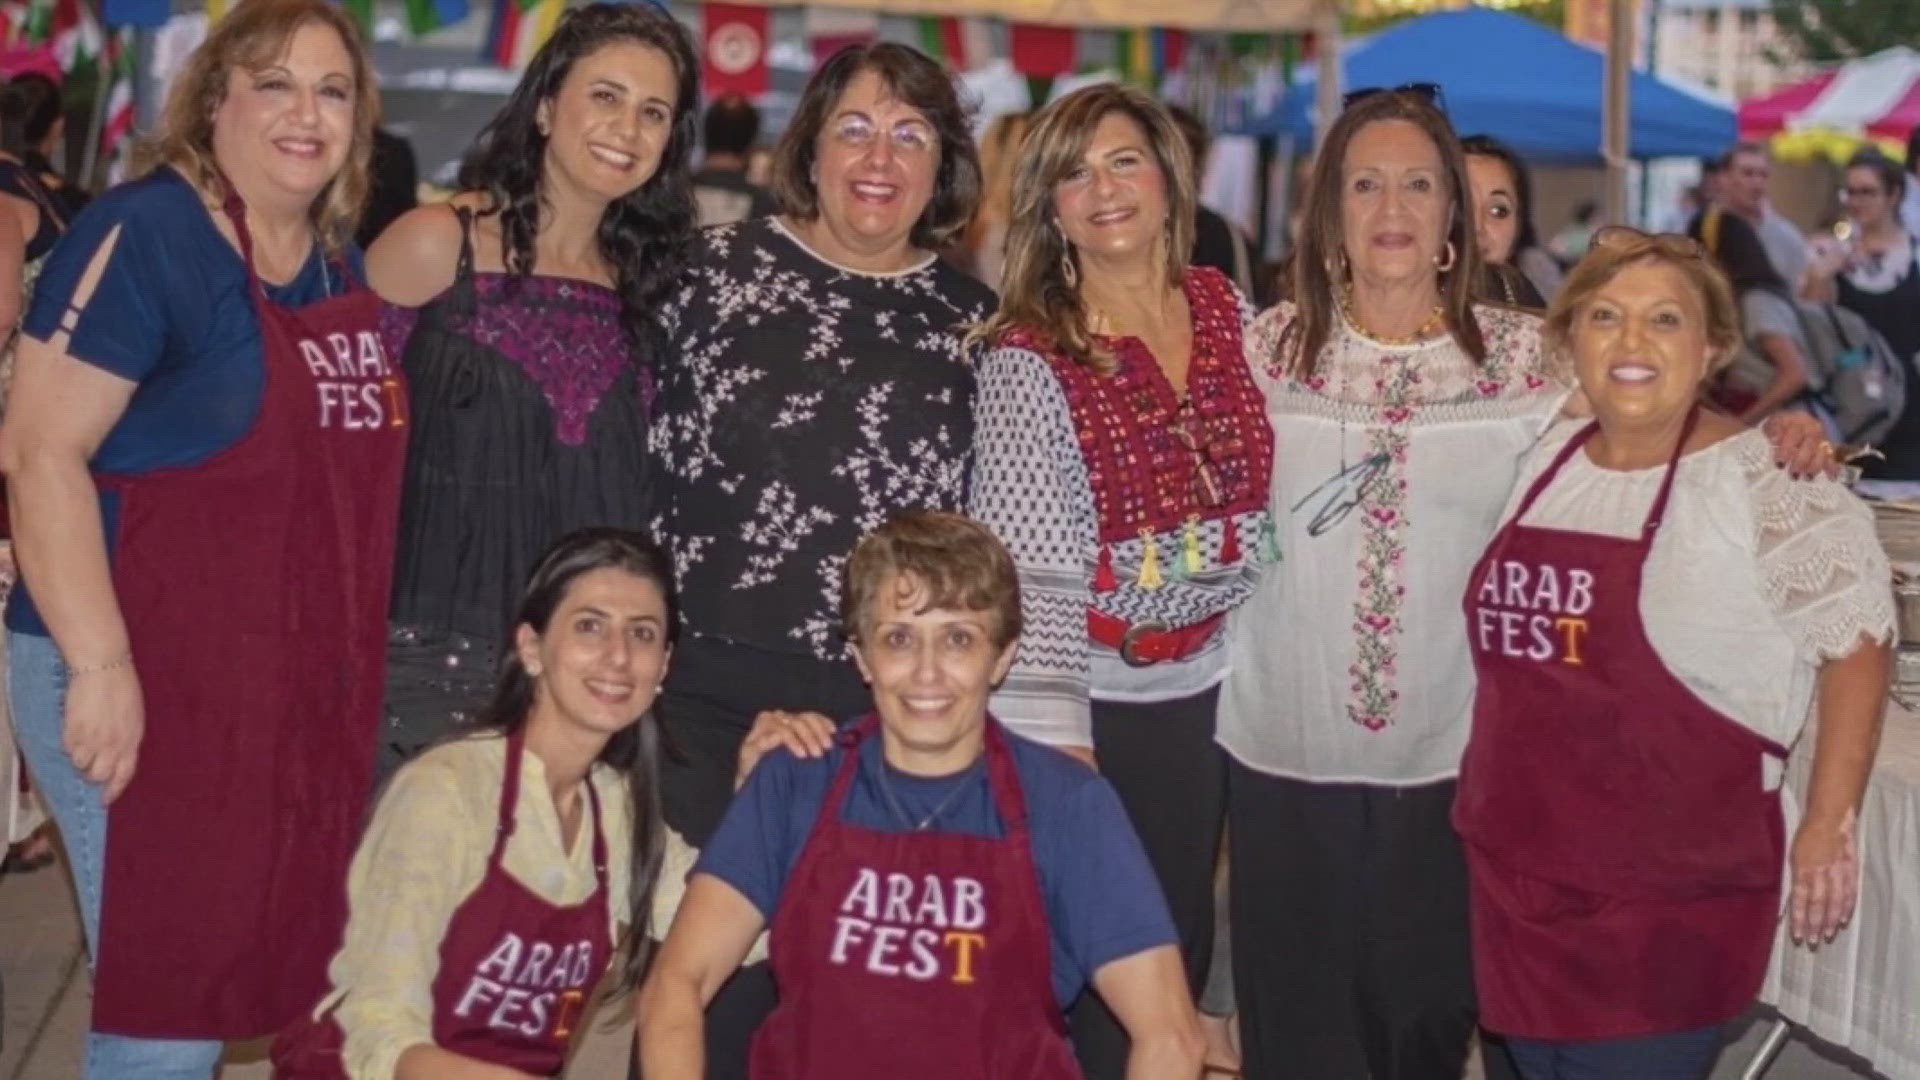 The family-friendly event is hosted by the Arab American Club of Knoxville. Get ready to immerse yourself in Middle Eastern food, fashion and fun.